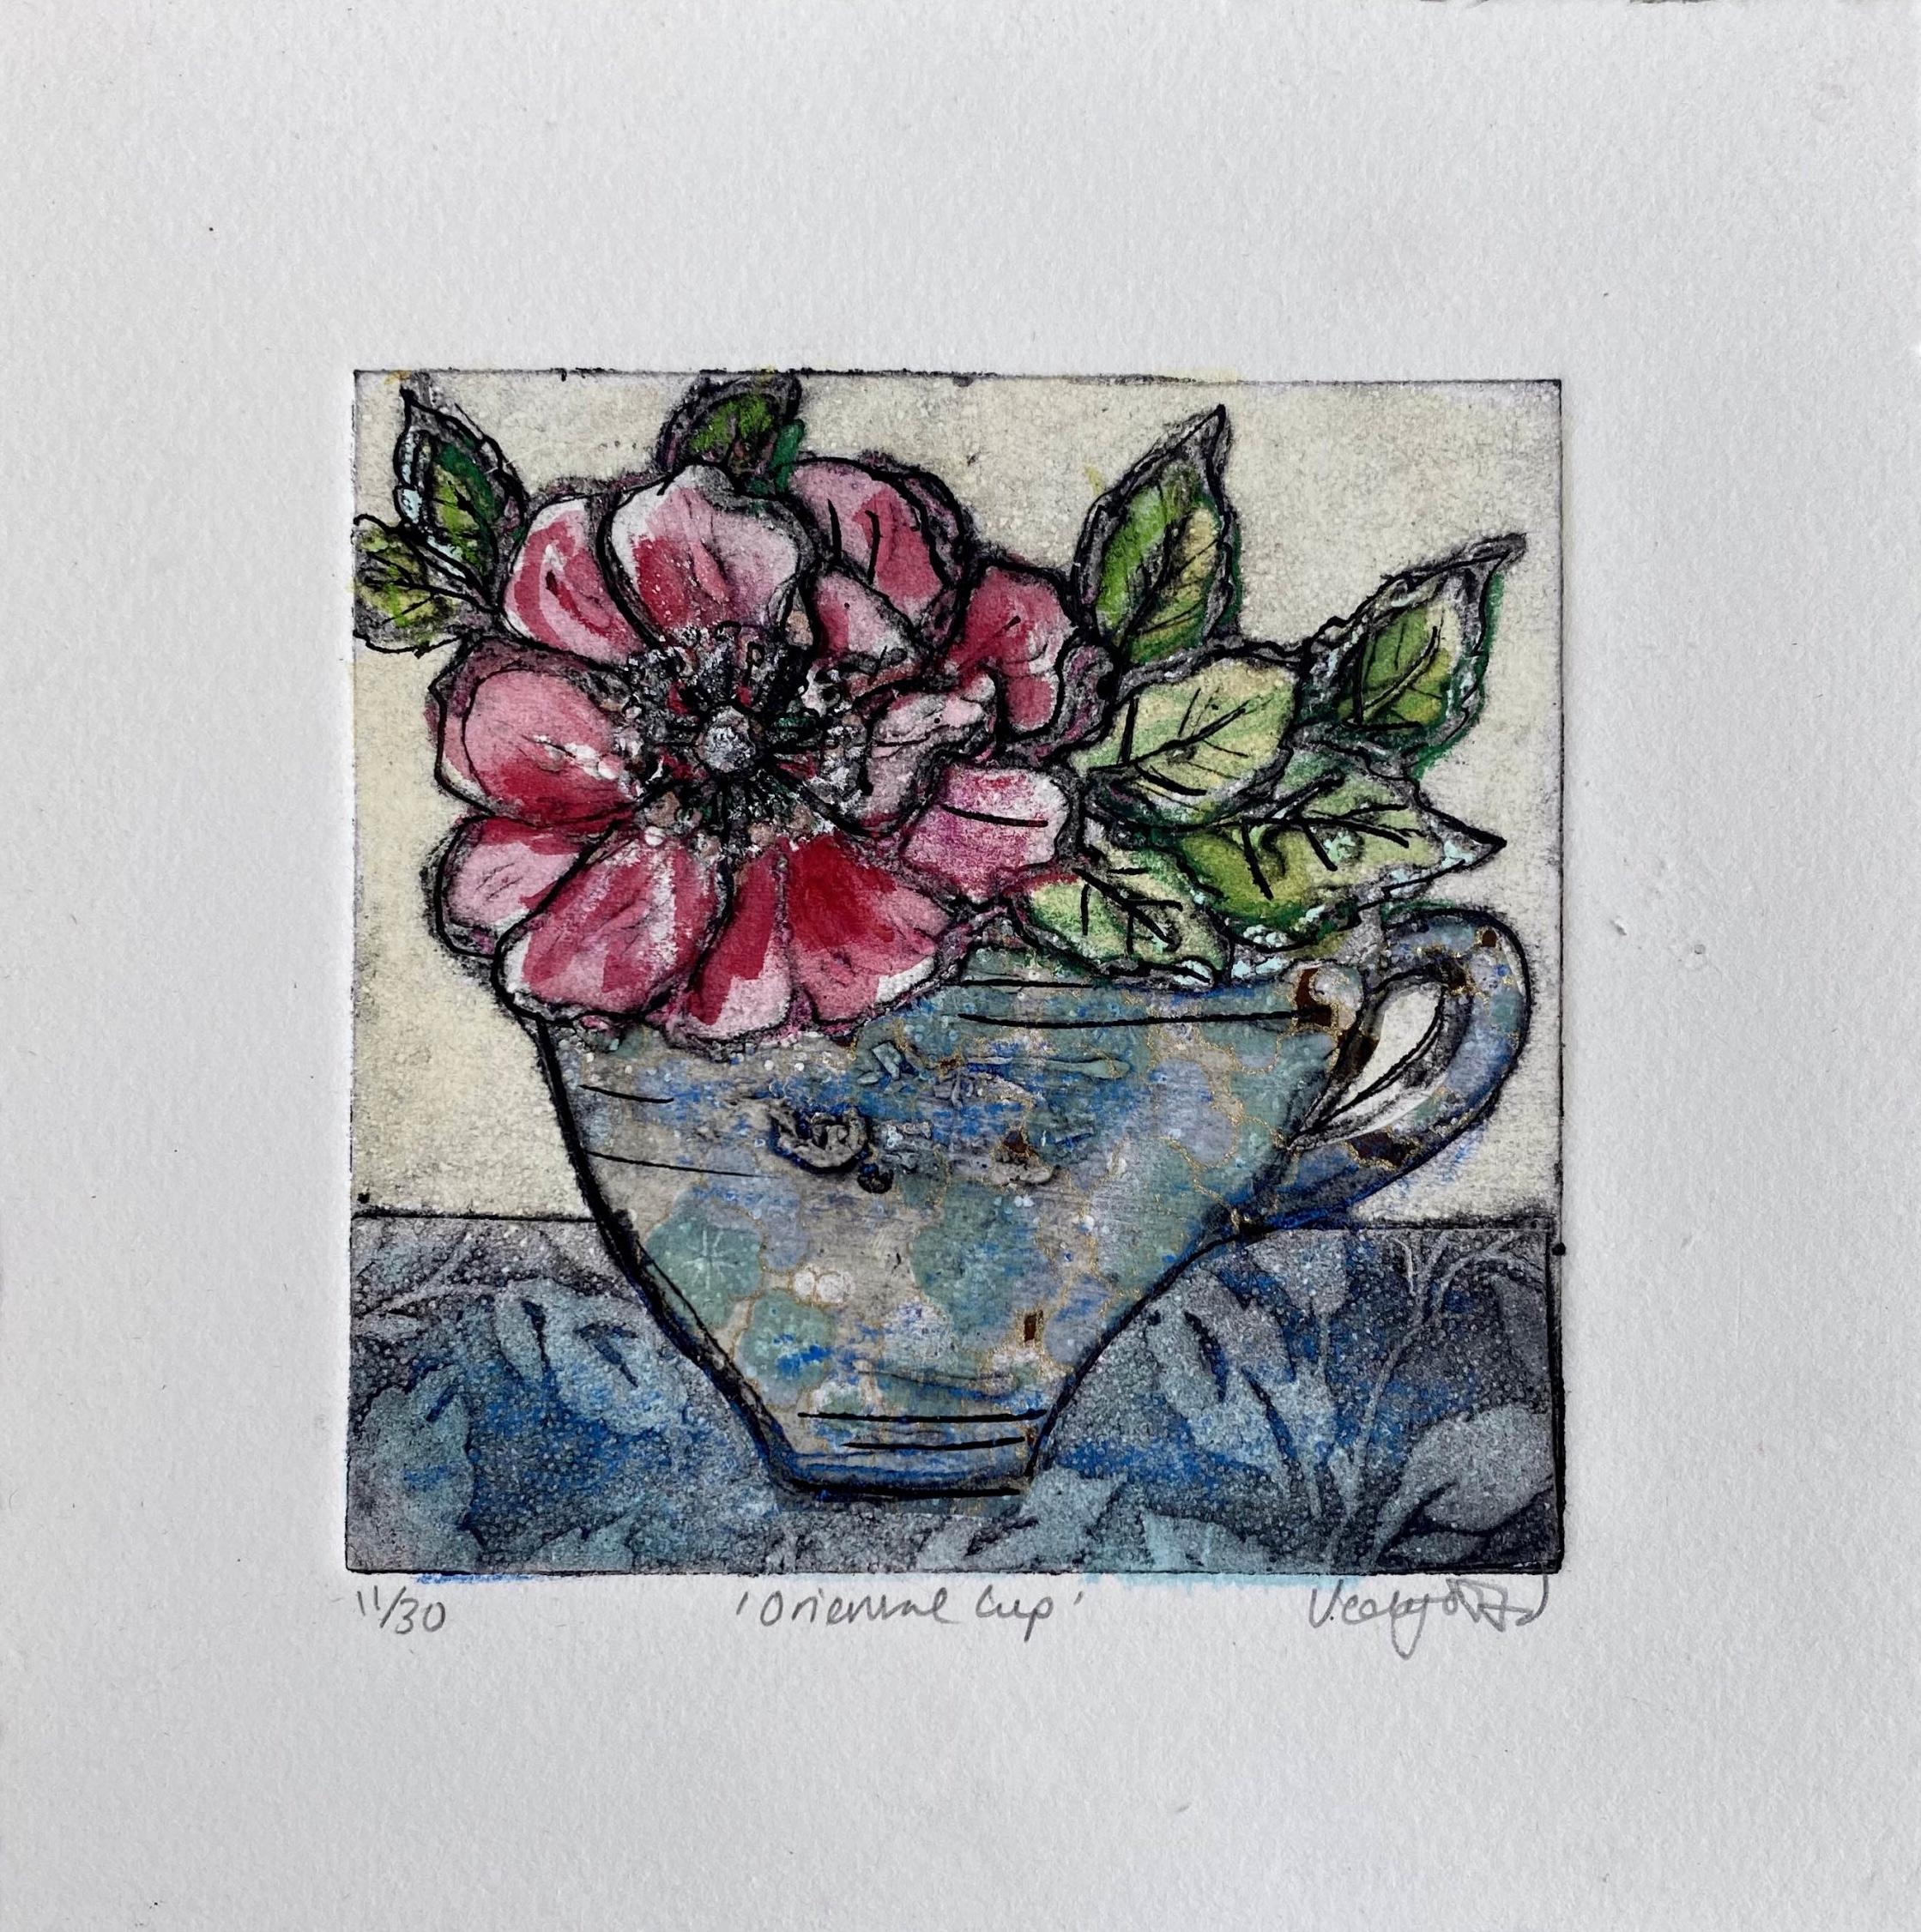 Oriental Cup by Vicky Oldfield, Collagraph print, Handmade print, Still life art